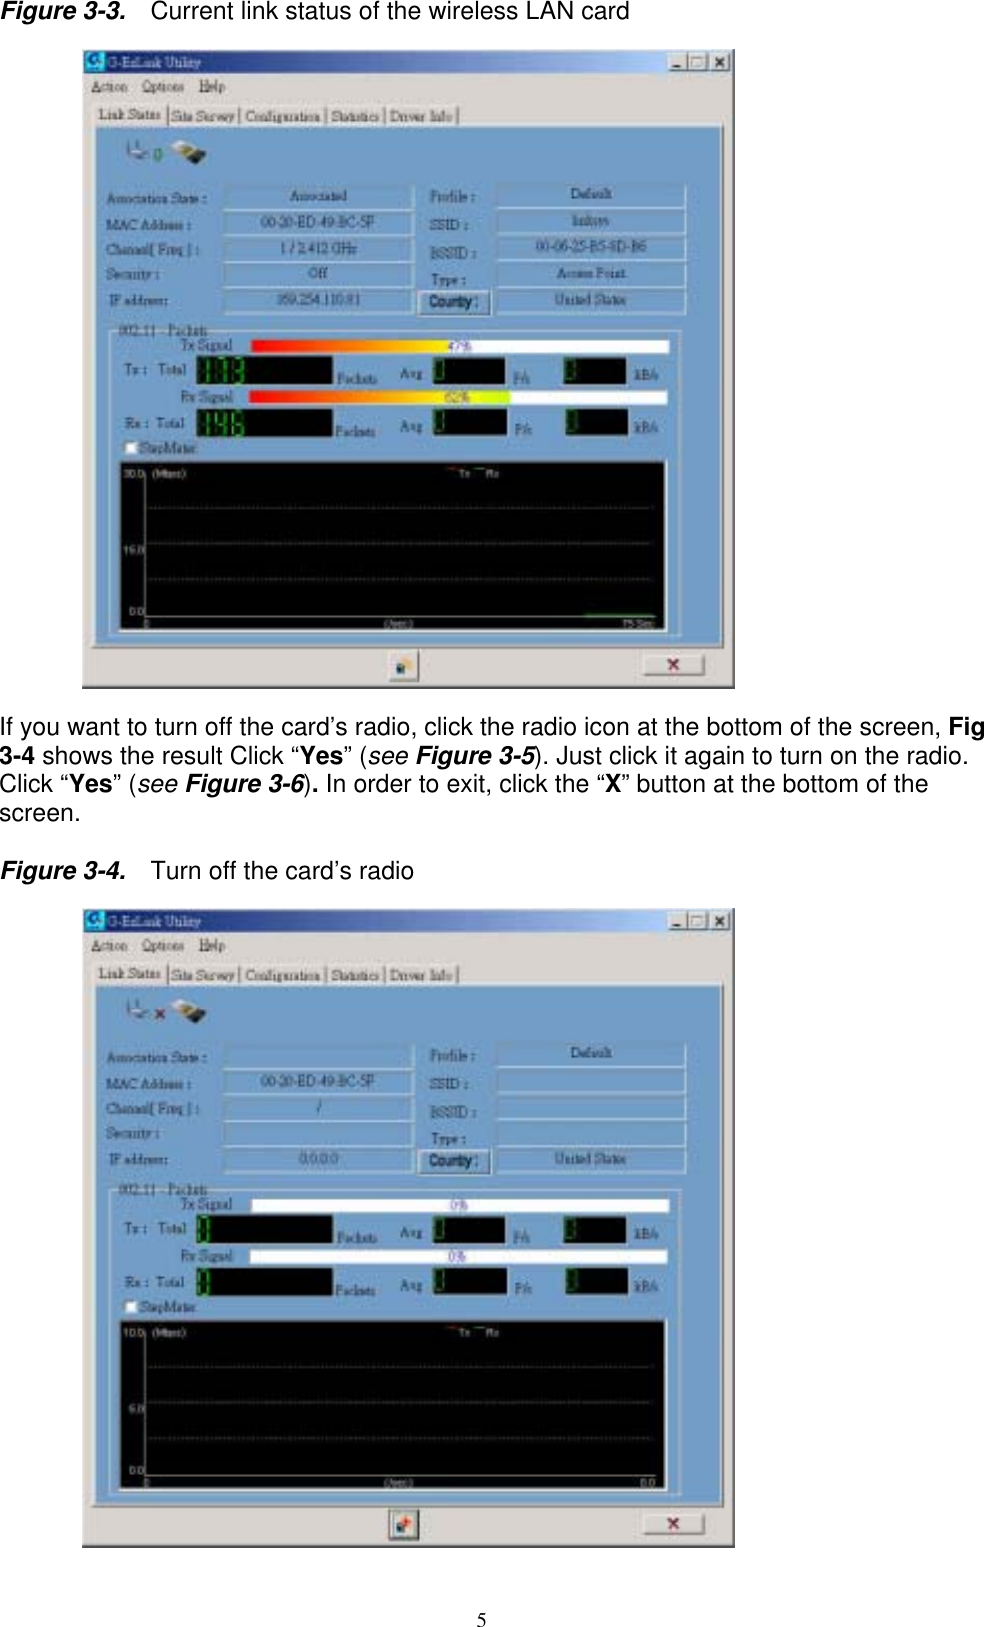 5  Figure 3-3.    Current link status of the wireless LAN card    If you want to turn off the card’s radio, click the radio icon at the bottom of the screen, Fig 3-4 shows the result Click “Yes” (see Figure 3-5). Just click it again to turn on the radio. Click “Yes” (see Figure 3-6). In order to exit, click the “X” button at the bottom of the screen.  Figure 3-4.    Turn off the card’s radio    